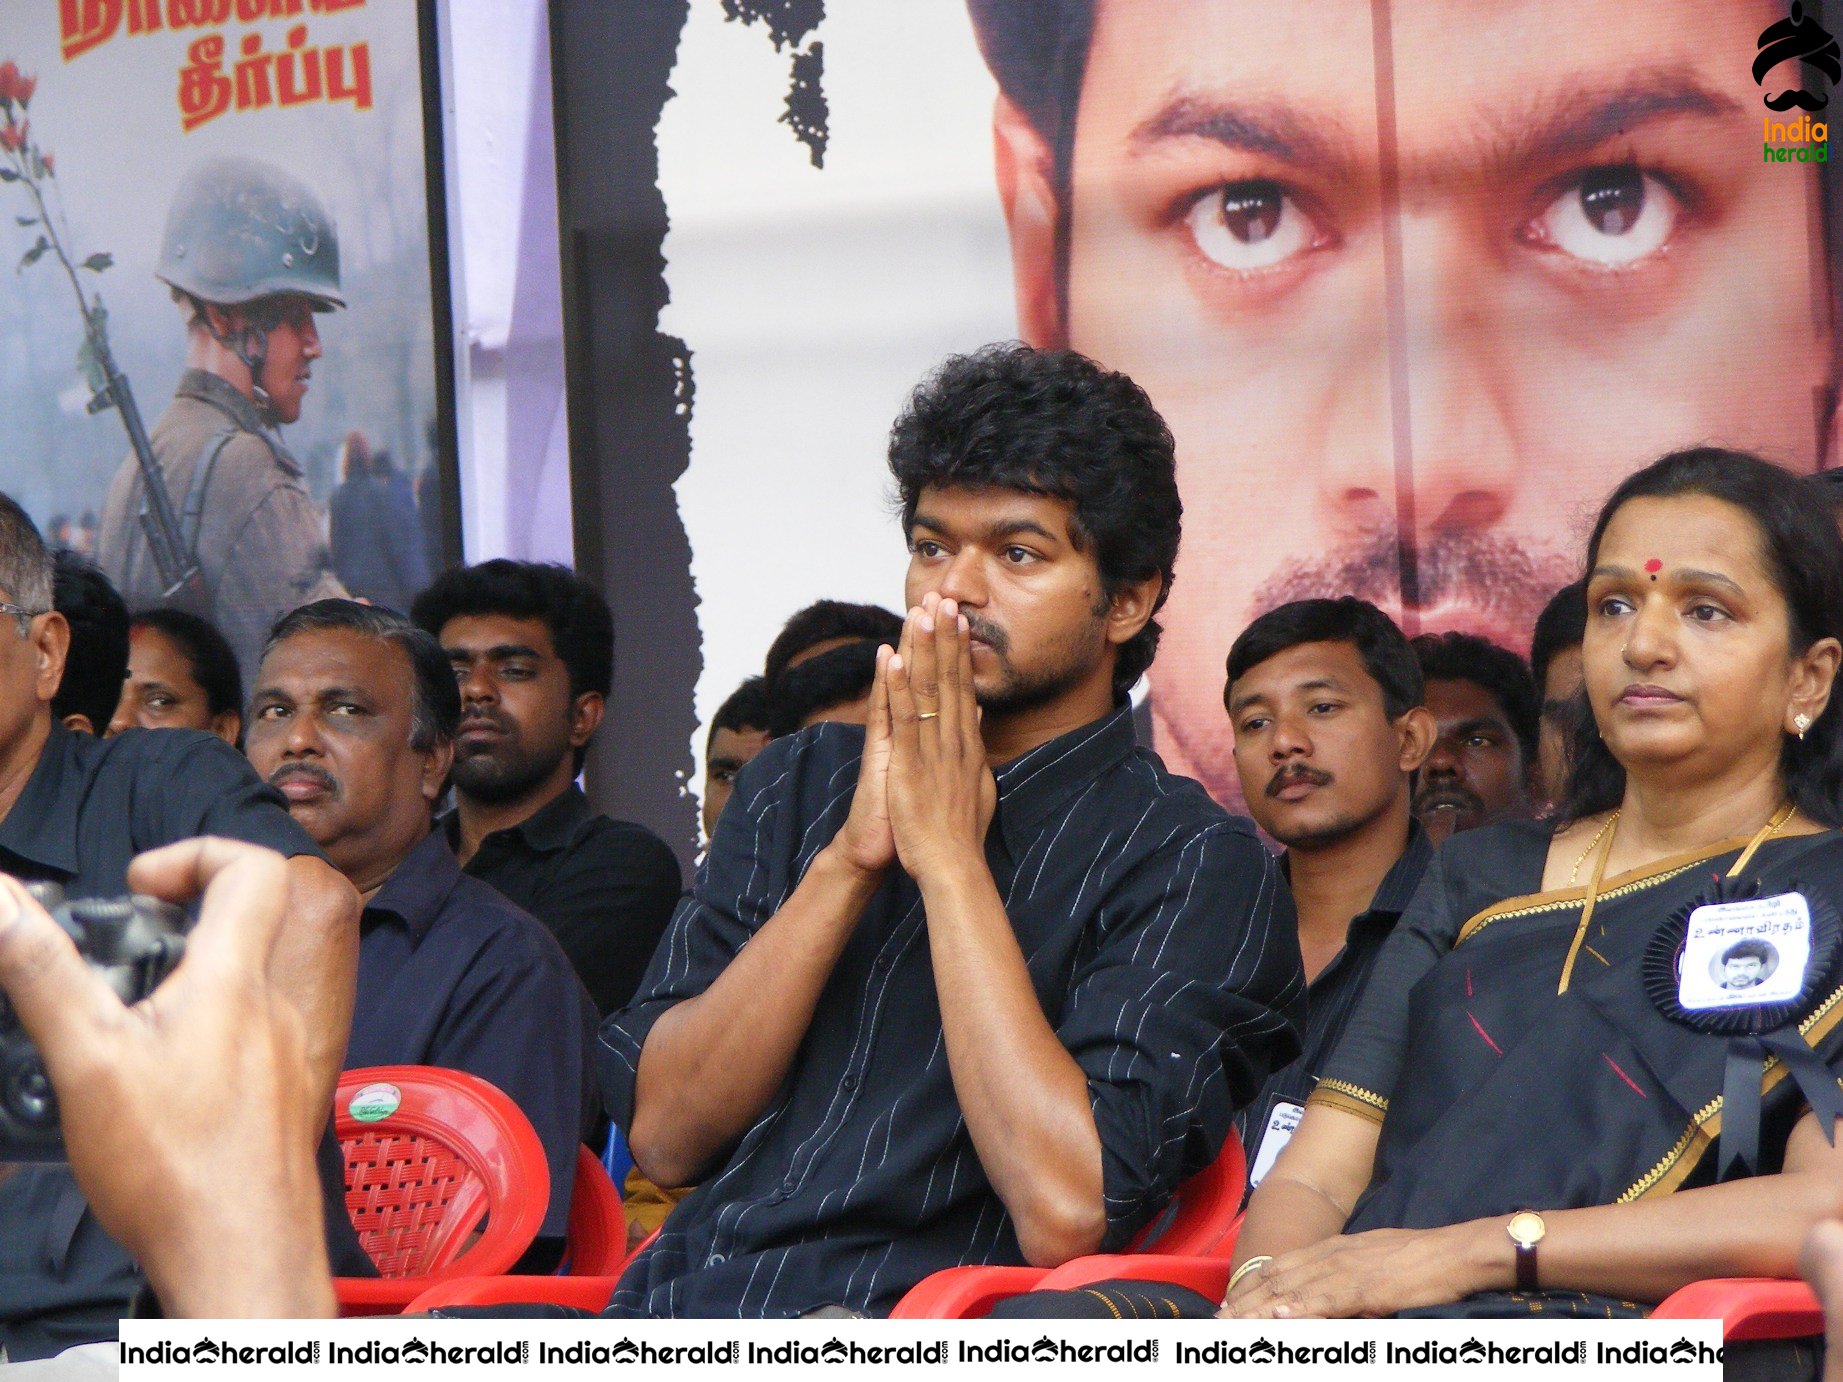 Actor Vijay with his wife while fasting for Eelam Tamils Set 1